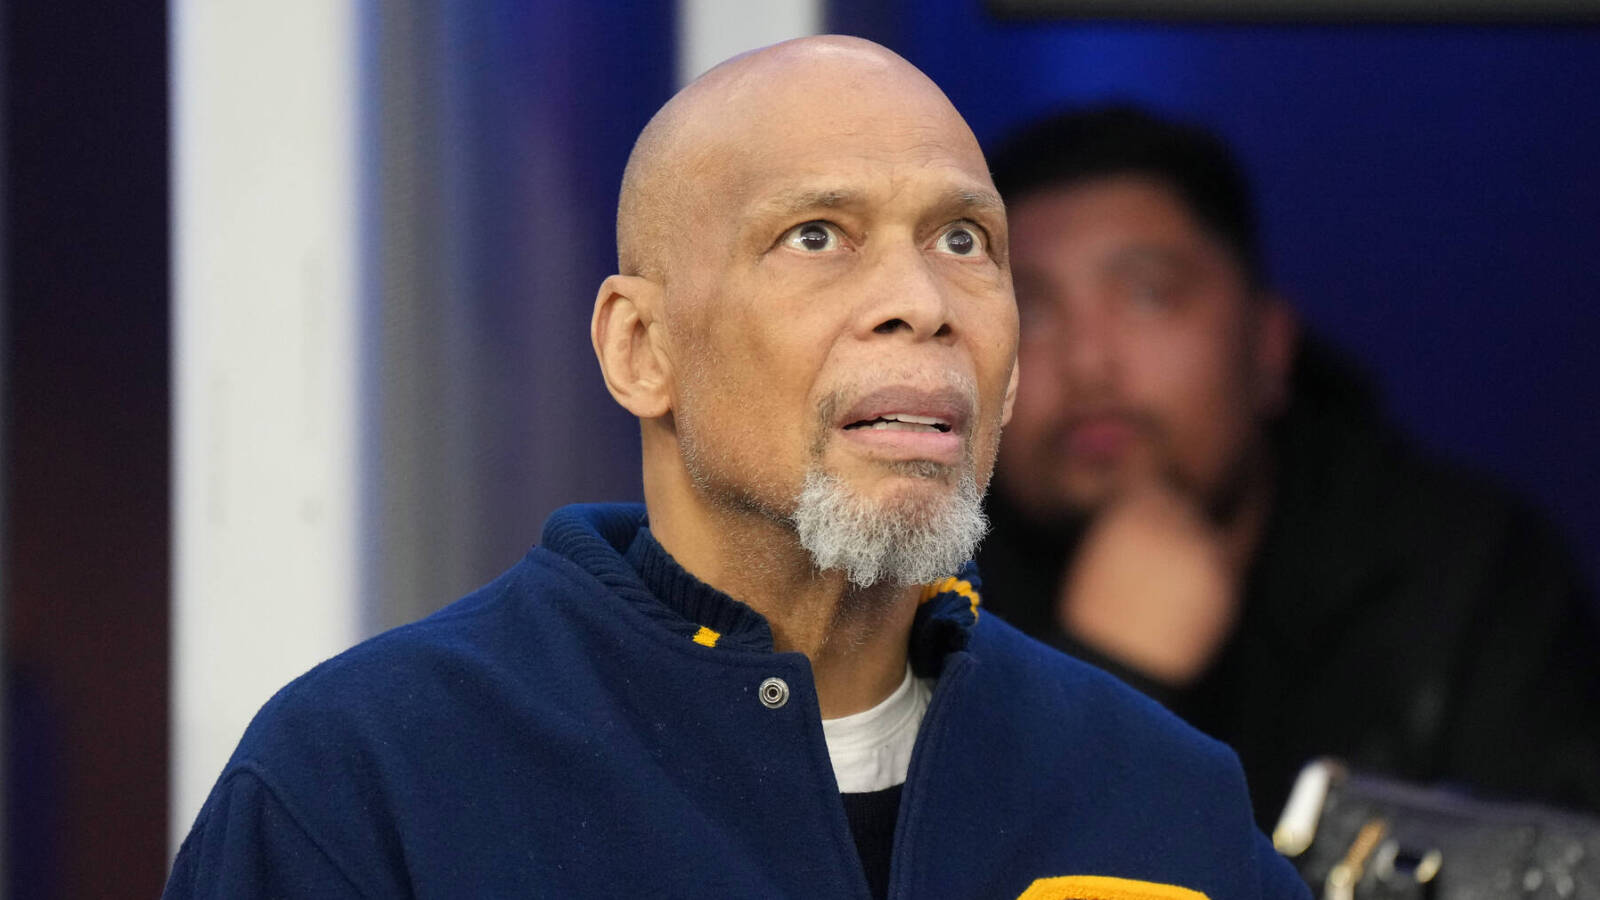 Kareem Abdul-Jabbar hospitalized after suffering major injury in an accidental fall